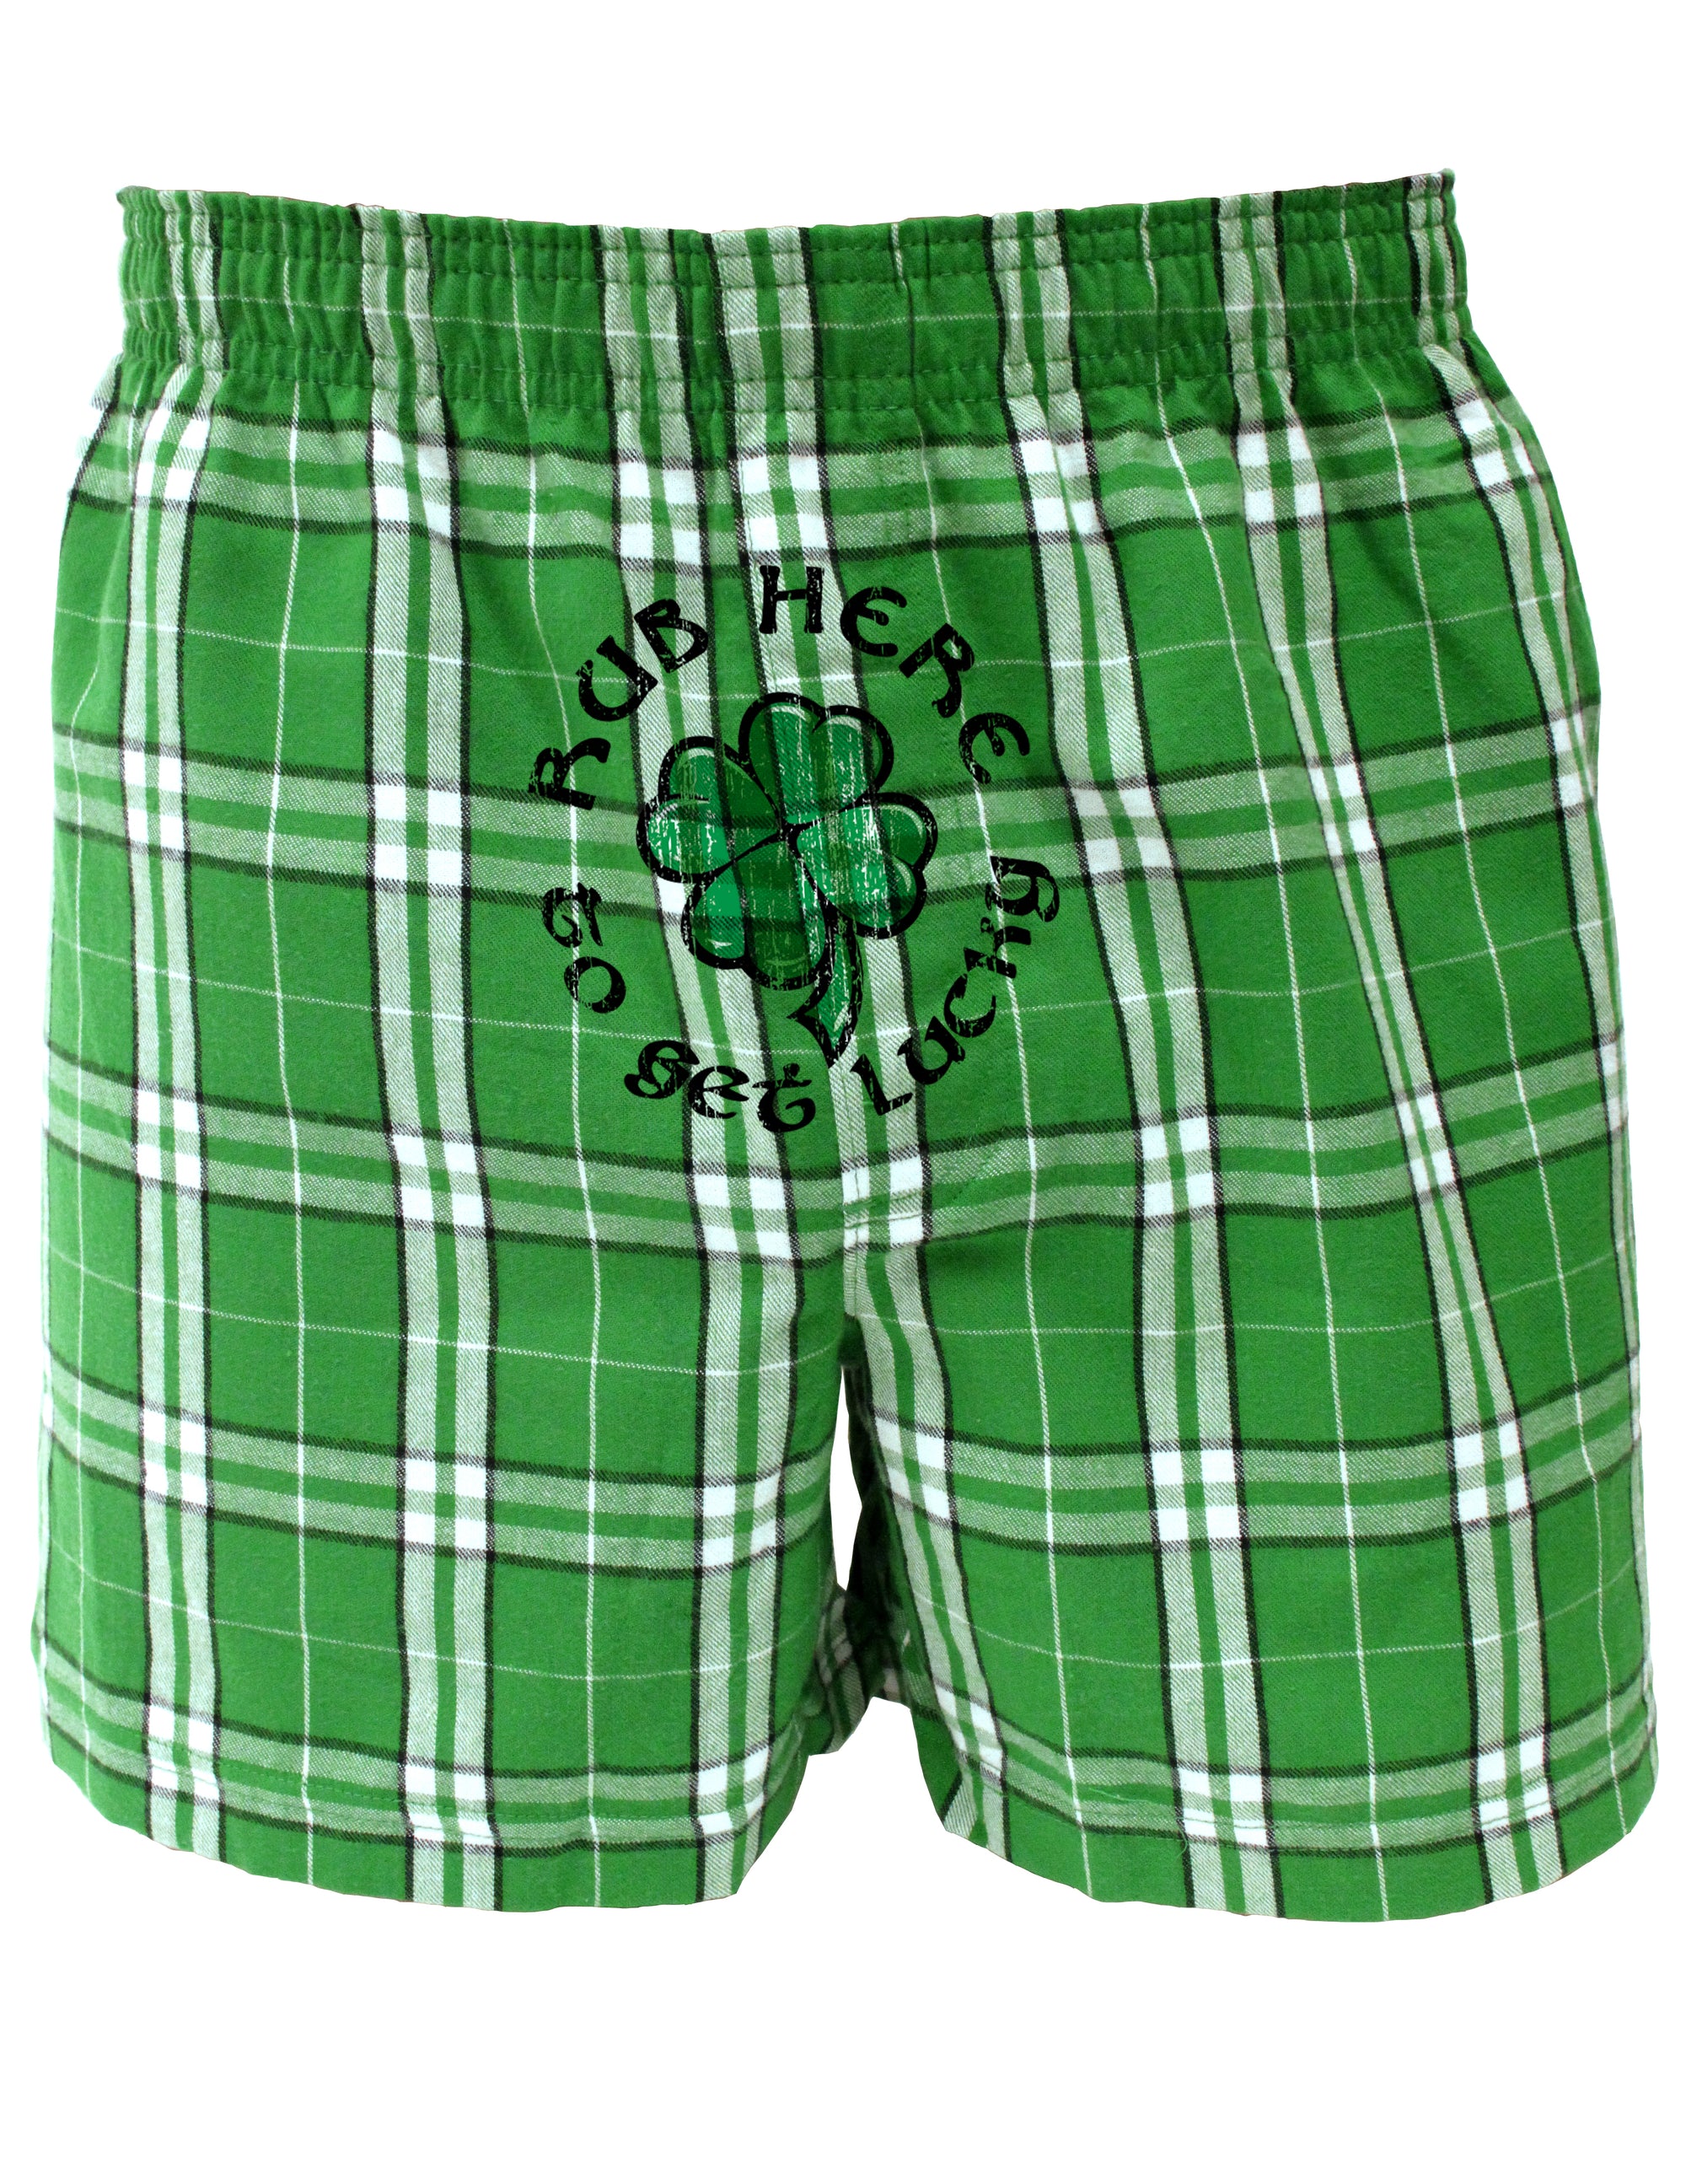 Rub Here to Get Lucky - St Patricks Day Green Boxers Shorts